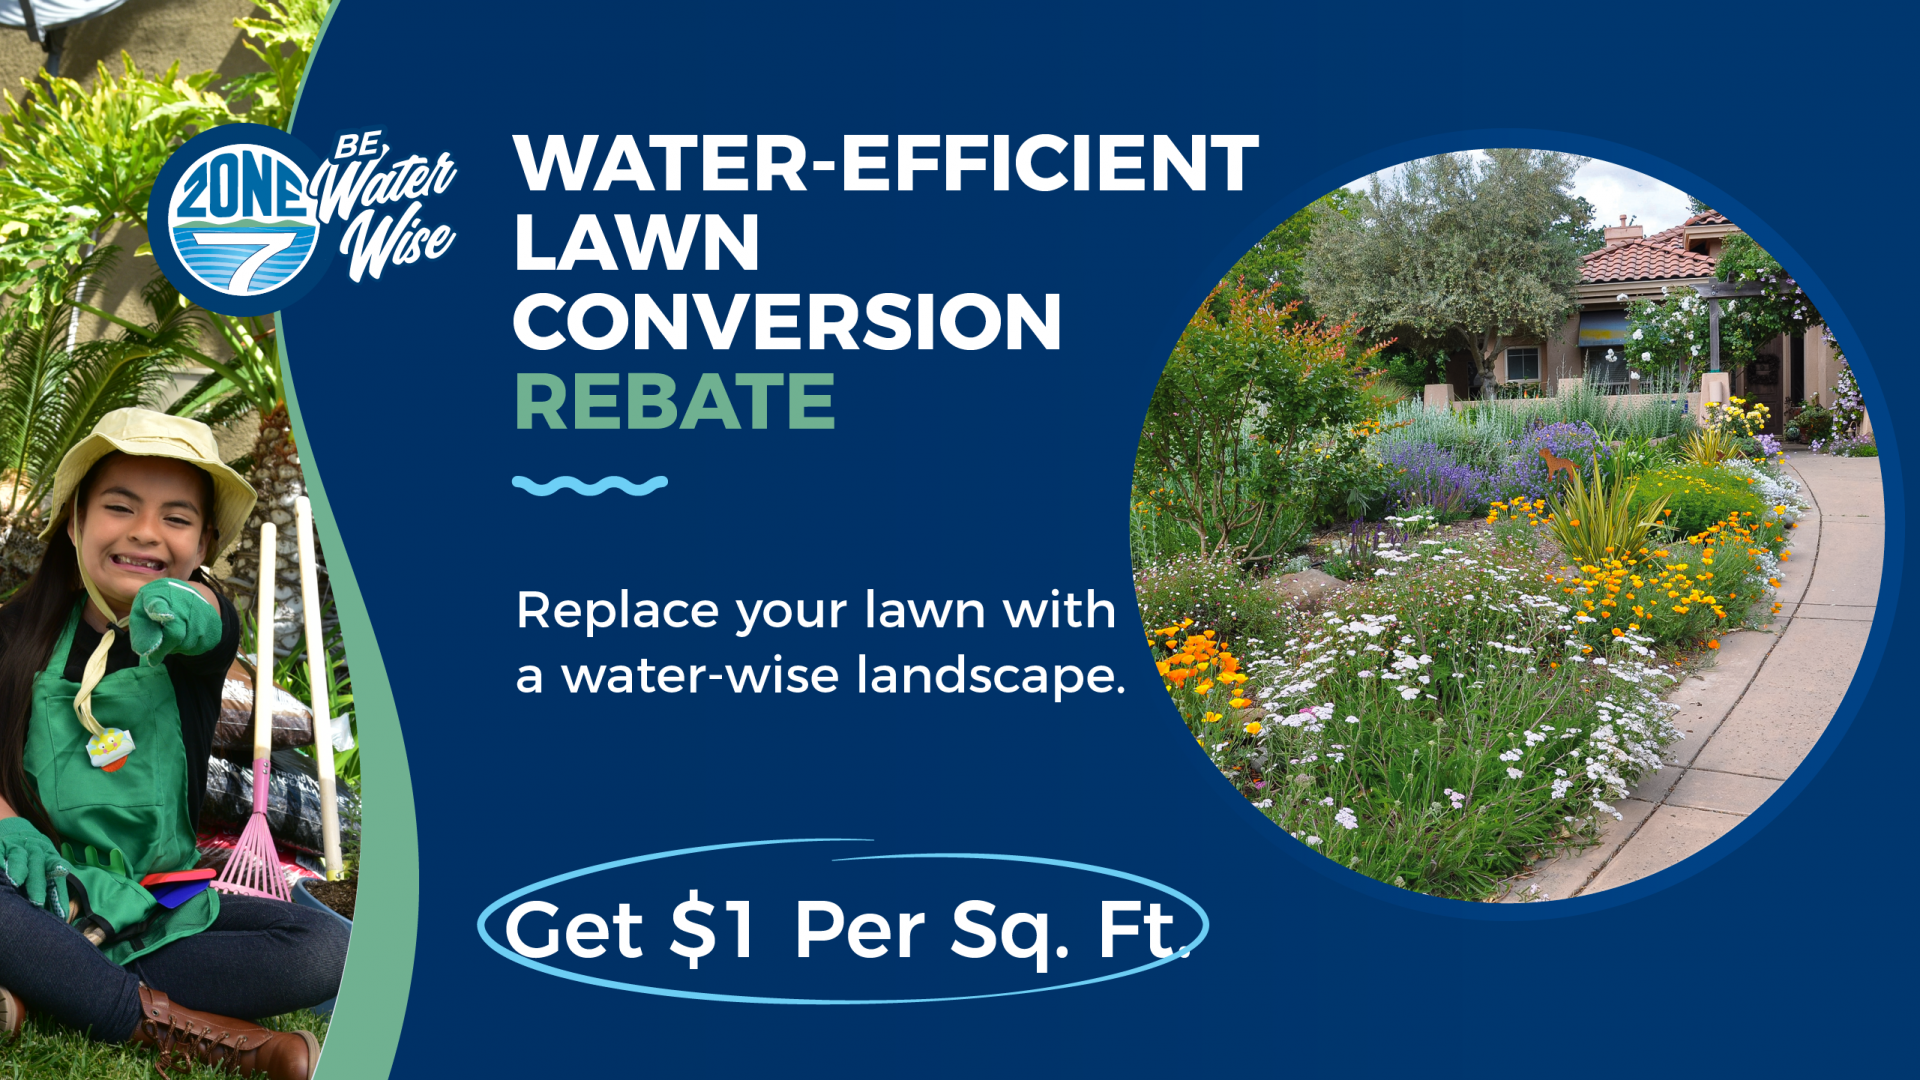 Apply for our Water-Efficient Lawn Conversion Rebate today!